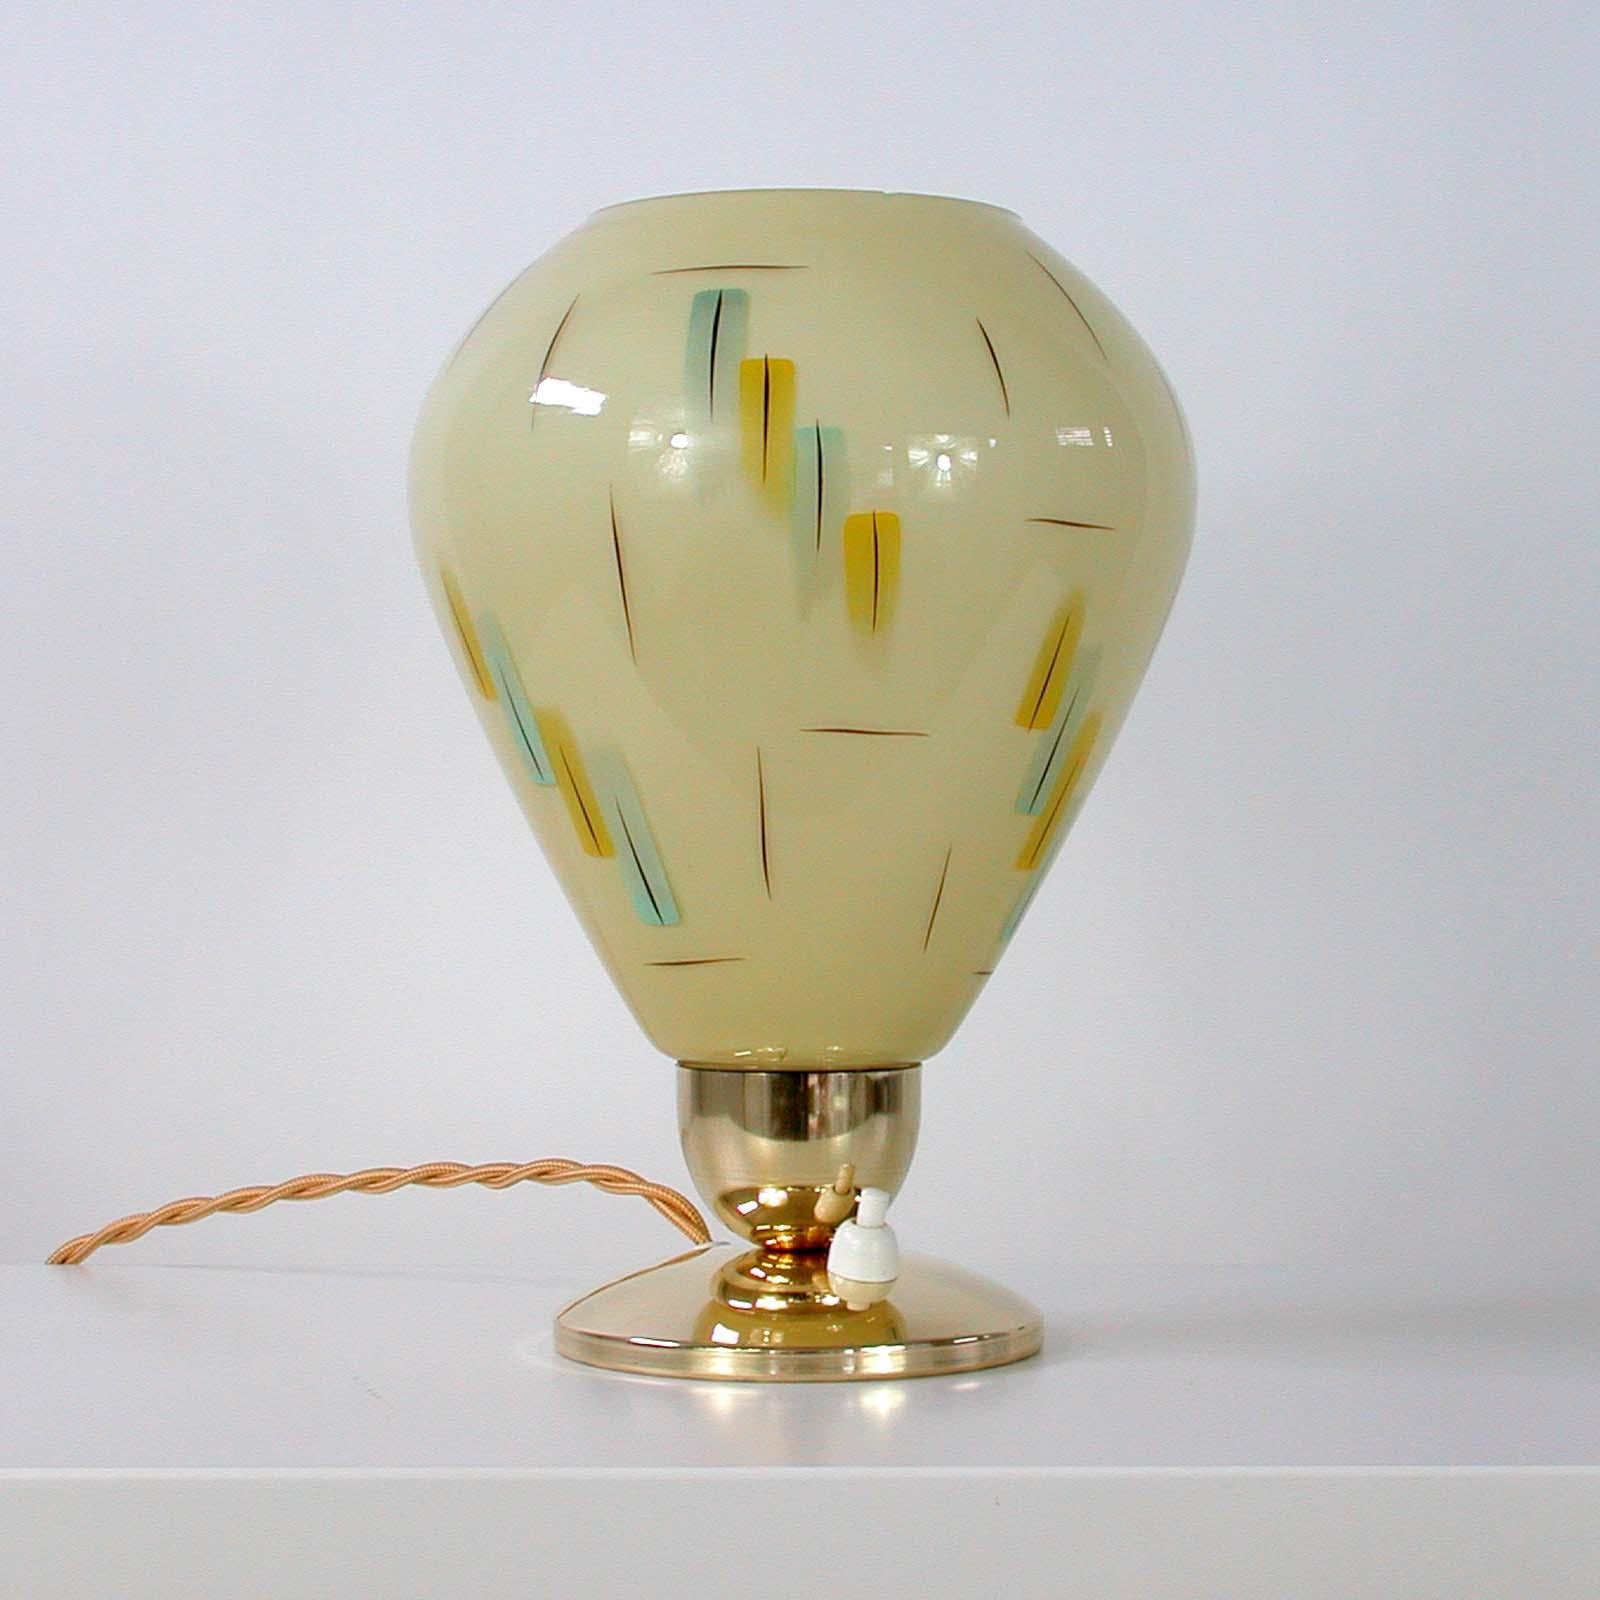 This vintage table lamp was designed and manufactured in Germany in the 1950s. It has got a brass foot and a cream colored and enameled opal glass lamp shade in typical 